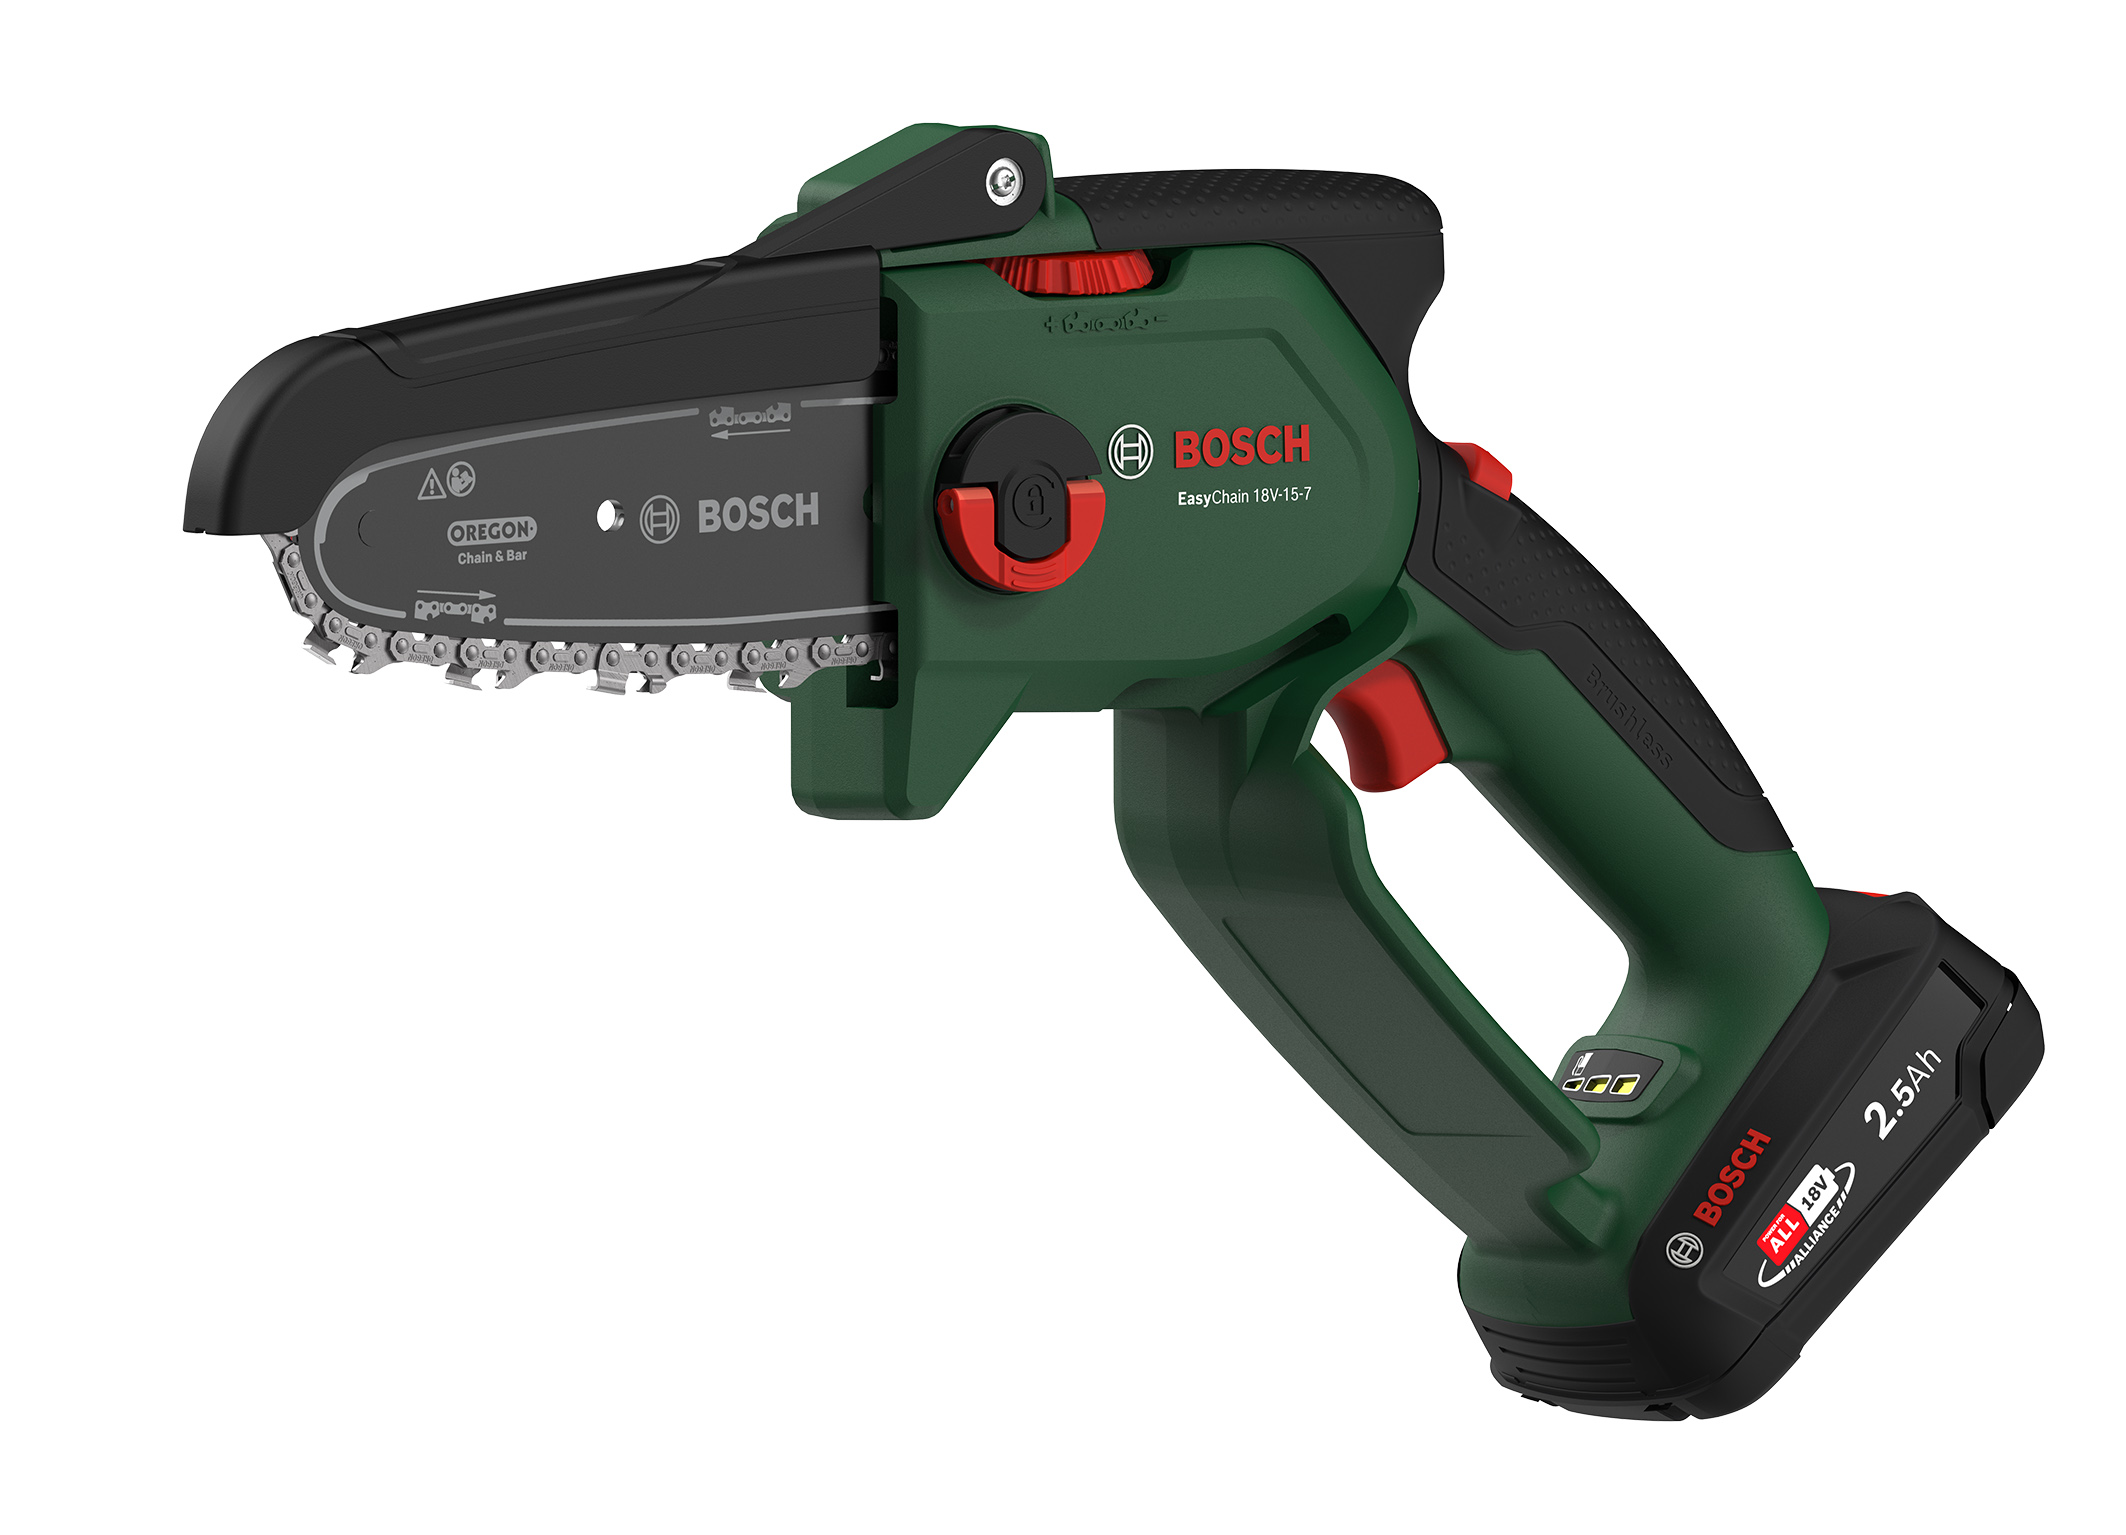 Latest addition to the ‘18V Power for All System’: Balanced and lightweight pruning saw for effortless sawing 